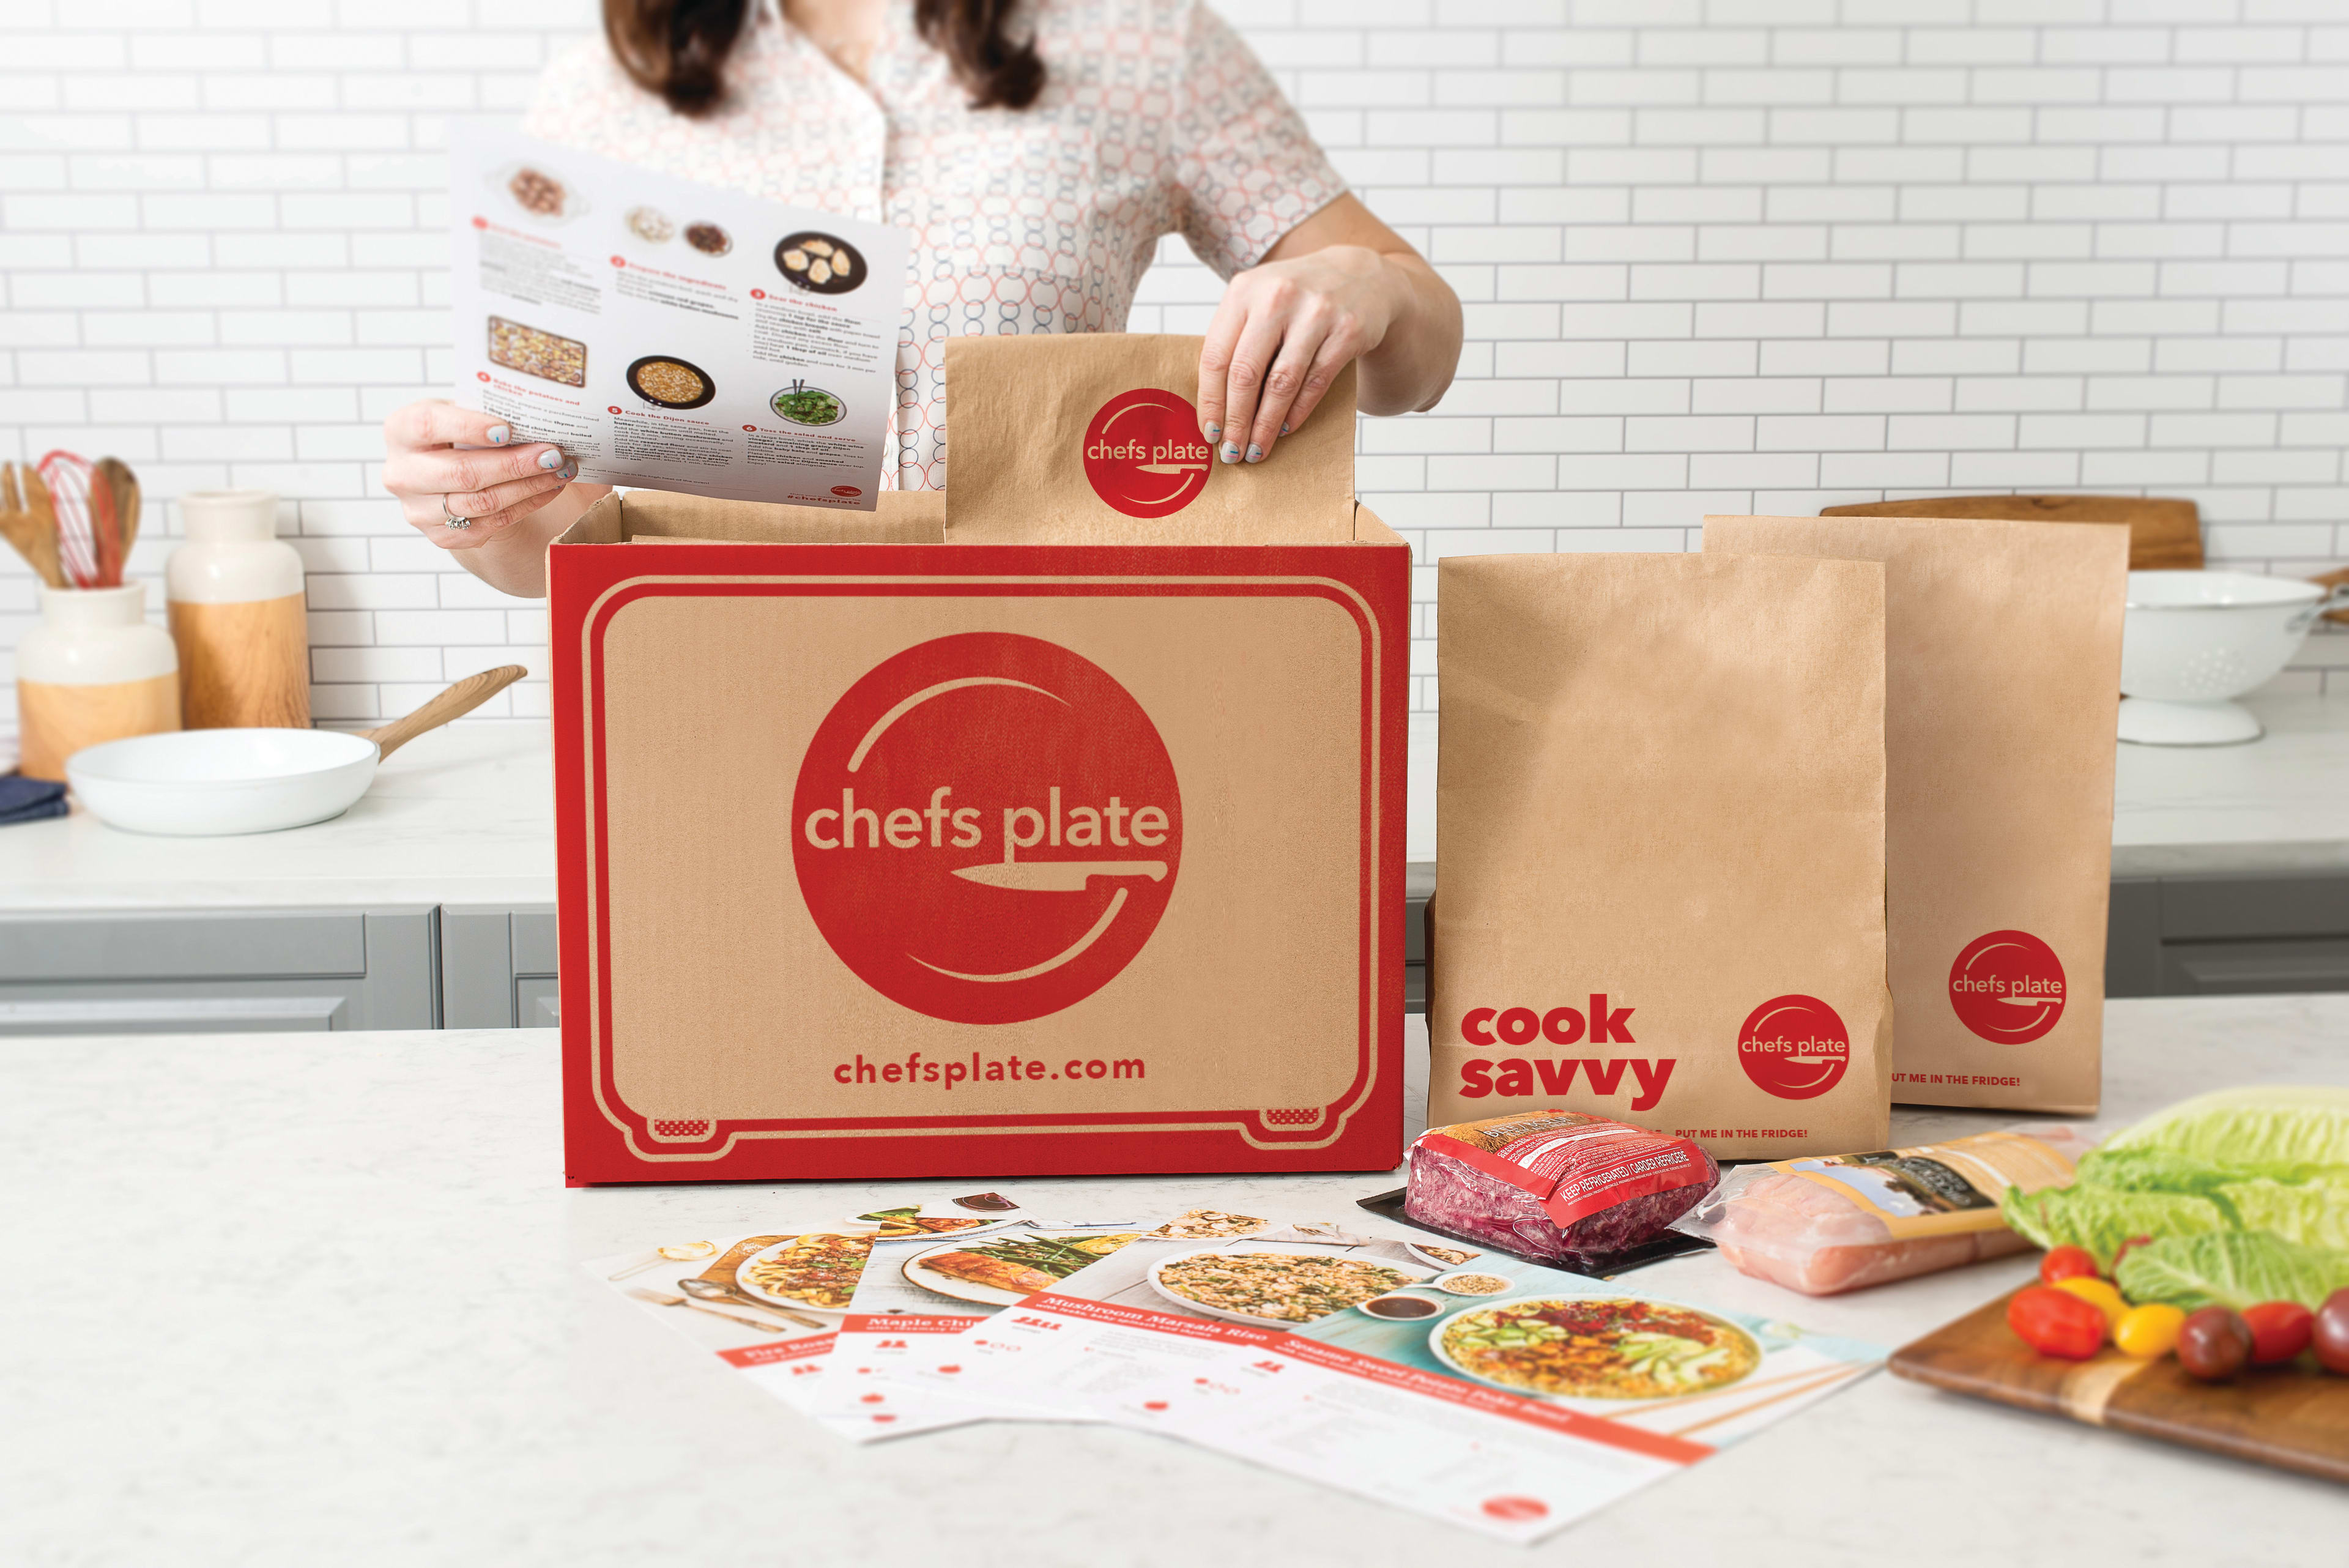 Reduced-cost meal kits